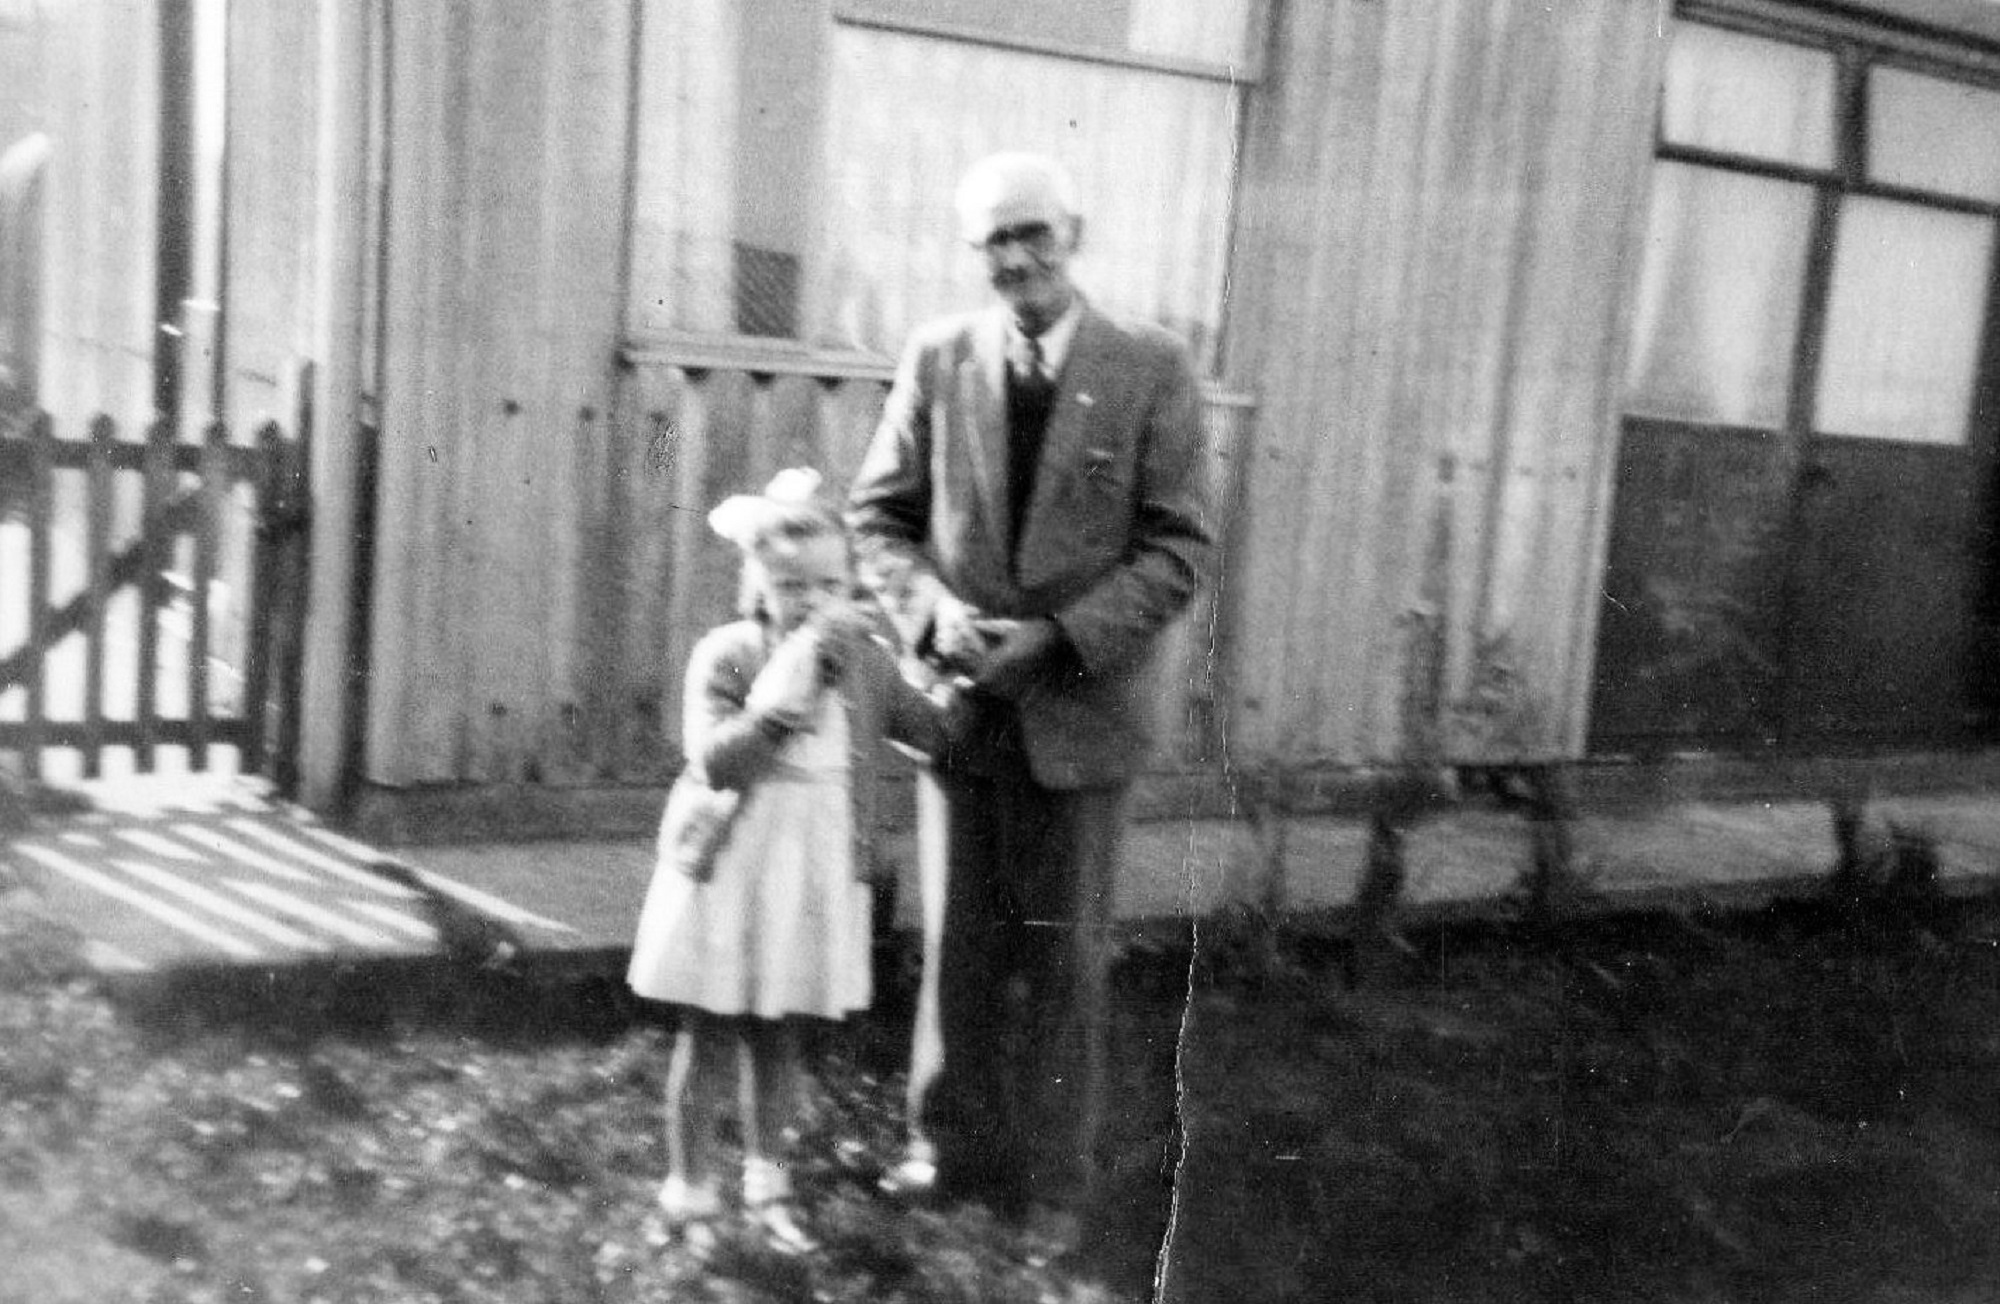 My sister Jeanette Attwell & my grandfather George Baylis. Port Talbot Place, Fforestfach, Swansea